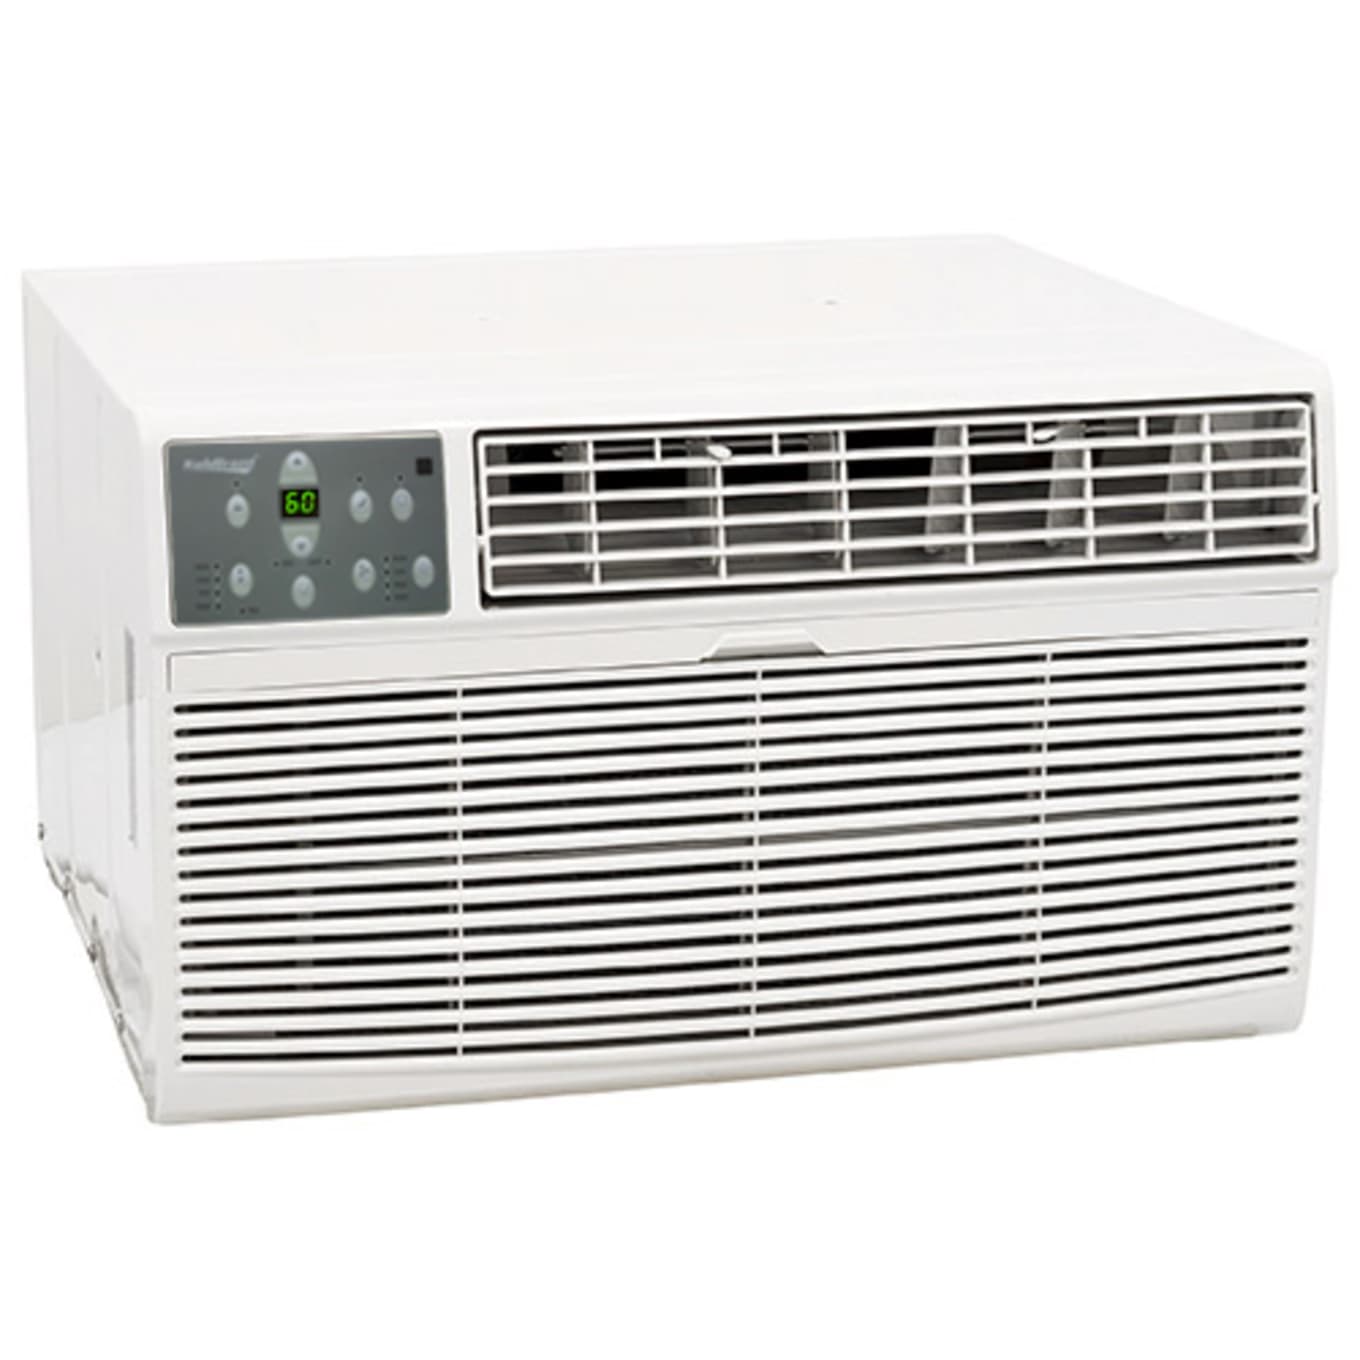 Koldfront, Ccy 8000 BTU 10.6 EER (Energy Efficiency Ratio) Thru The Wall / Through The Wall Air Conditioner